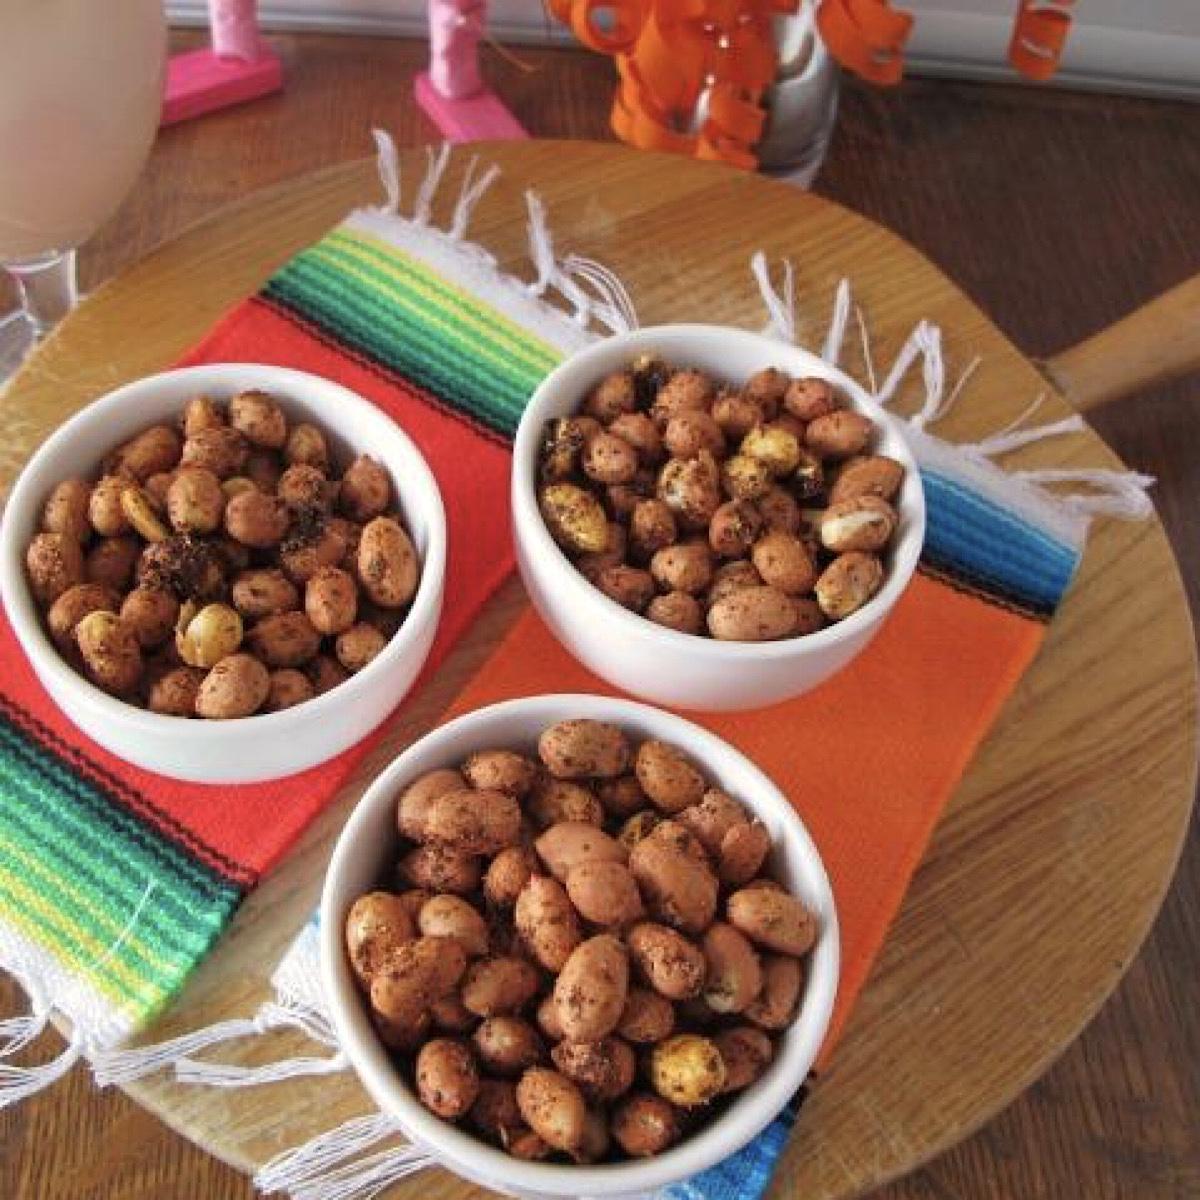 Chile lime peanuts as a Mexican bar snack